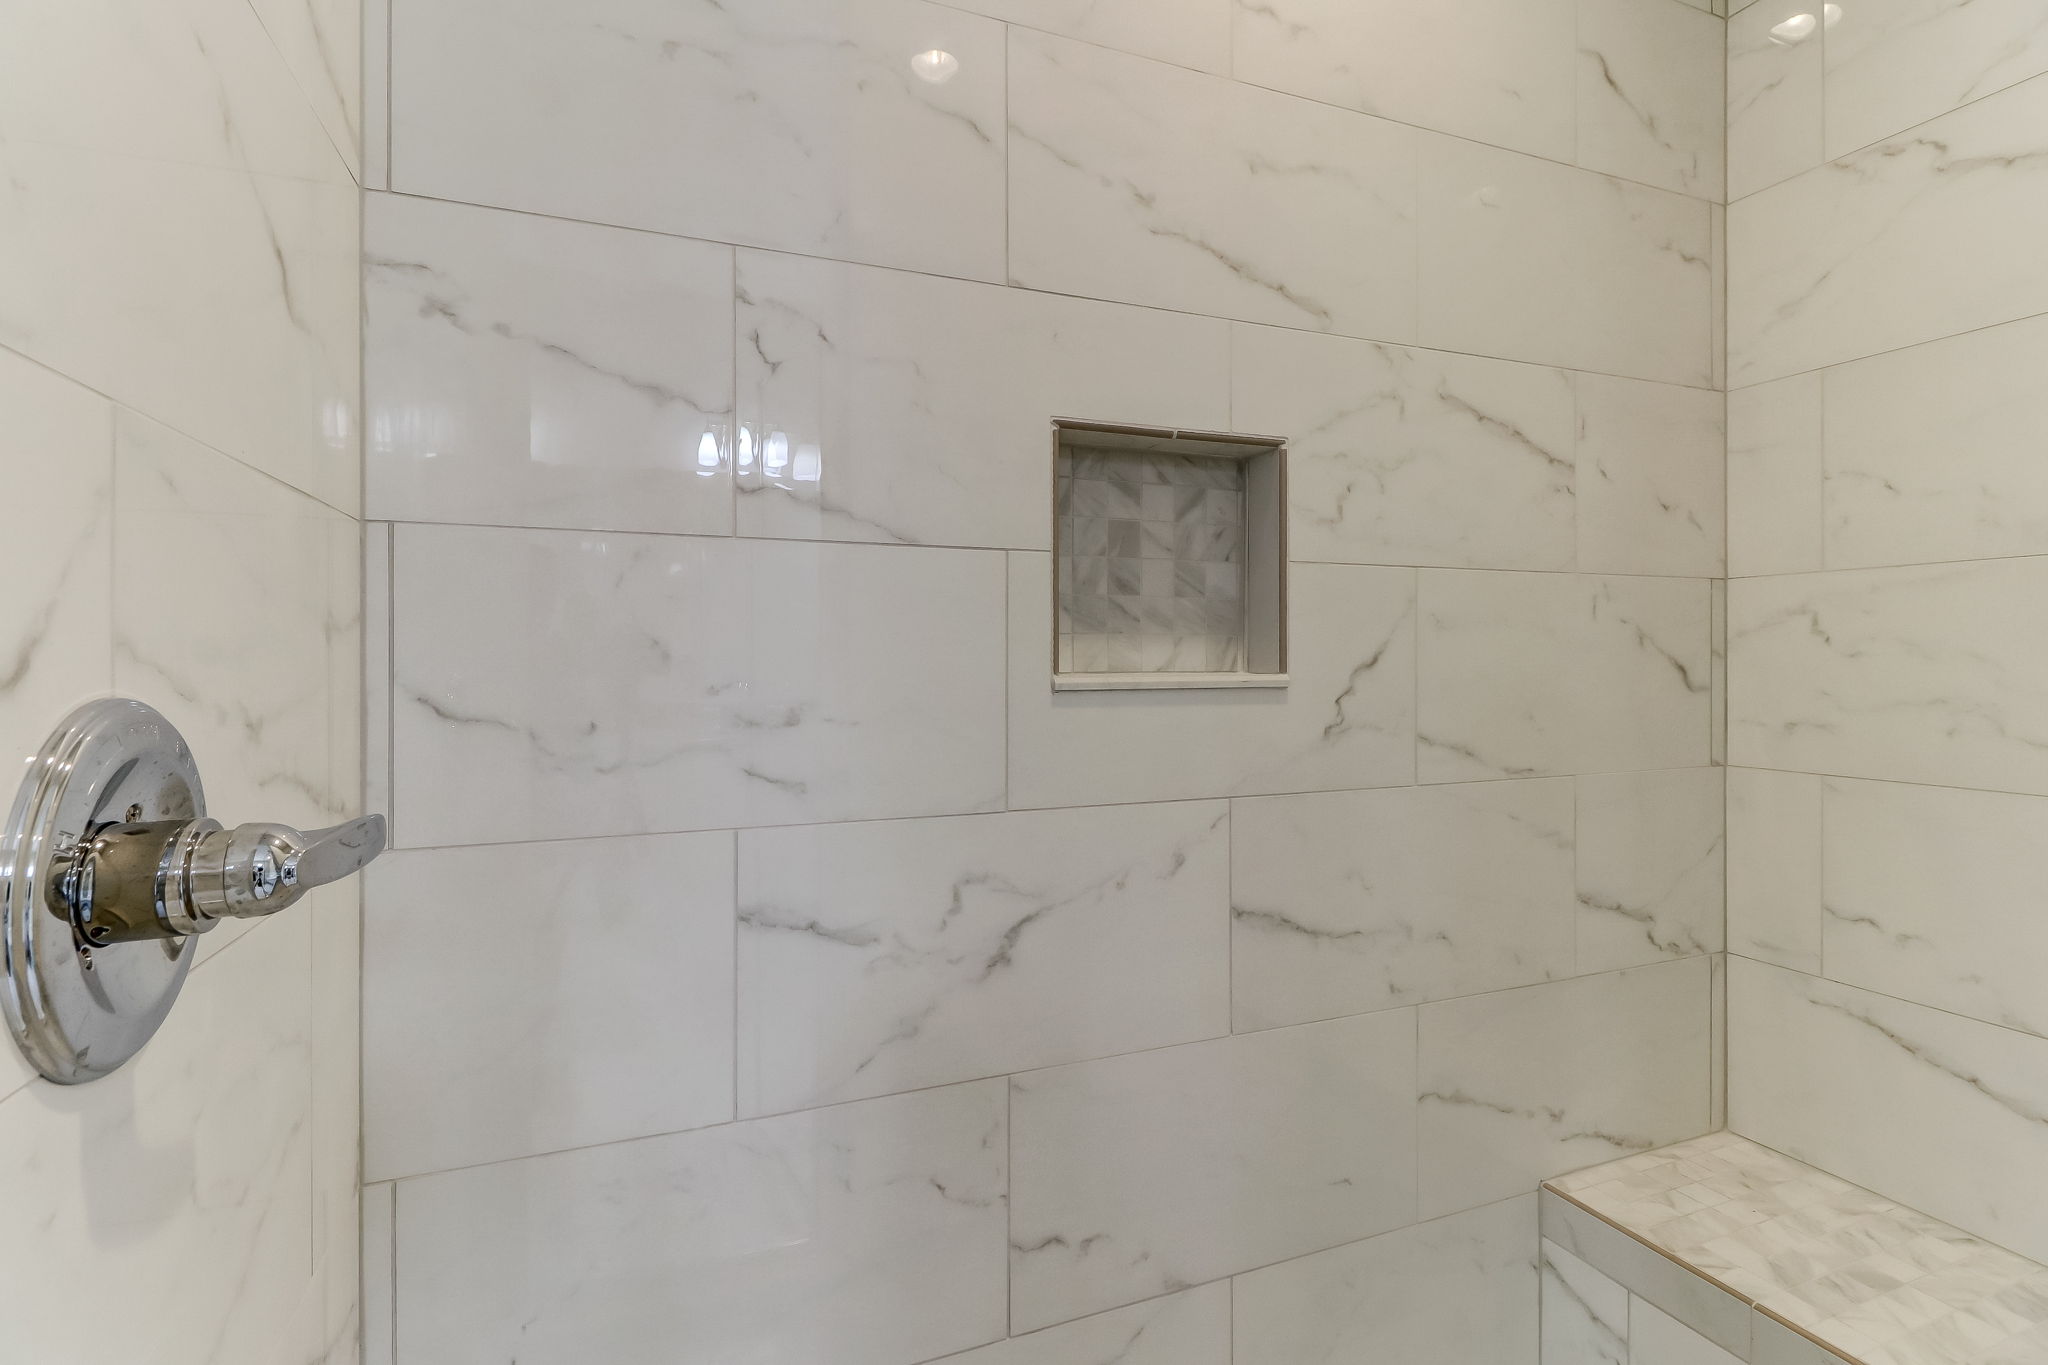 The owners suite offers privacy, comfort and plenty of natural light - don't miss the gorgeous claw foot bathtub and marble style tile in shower!